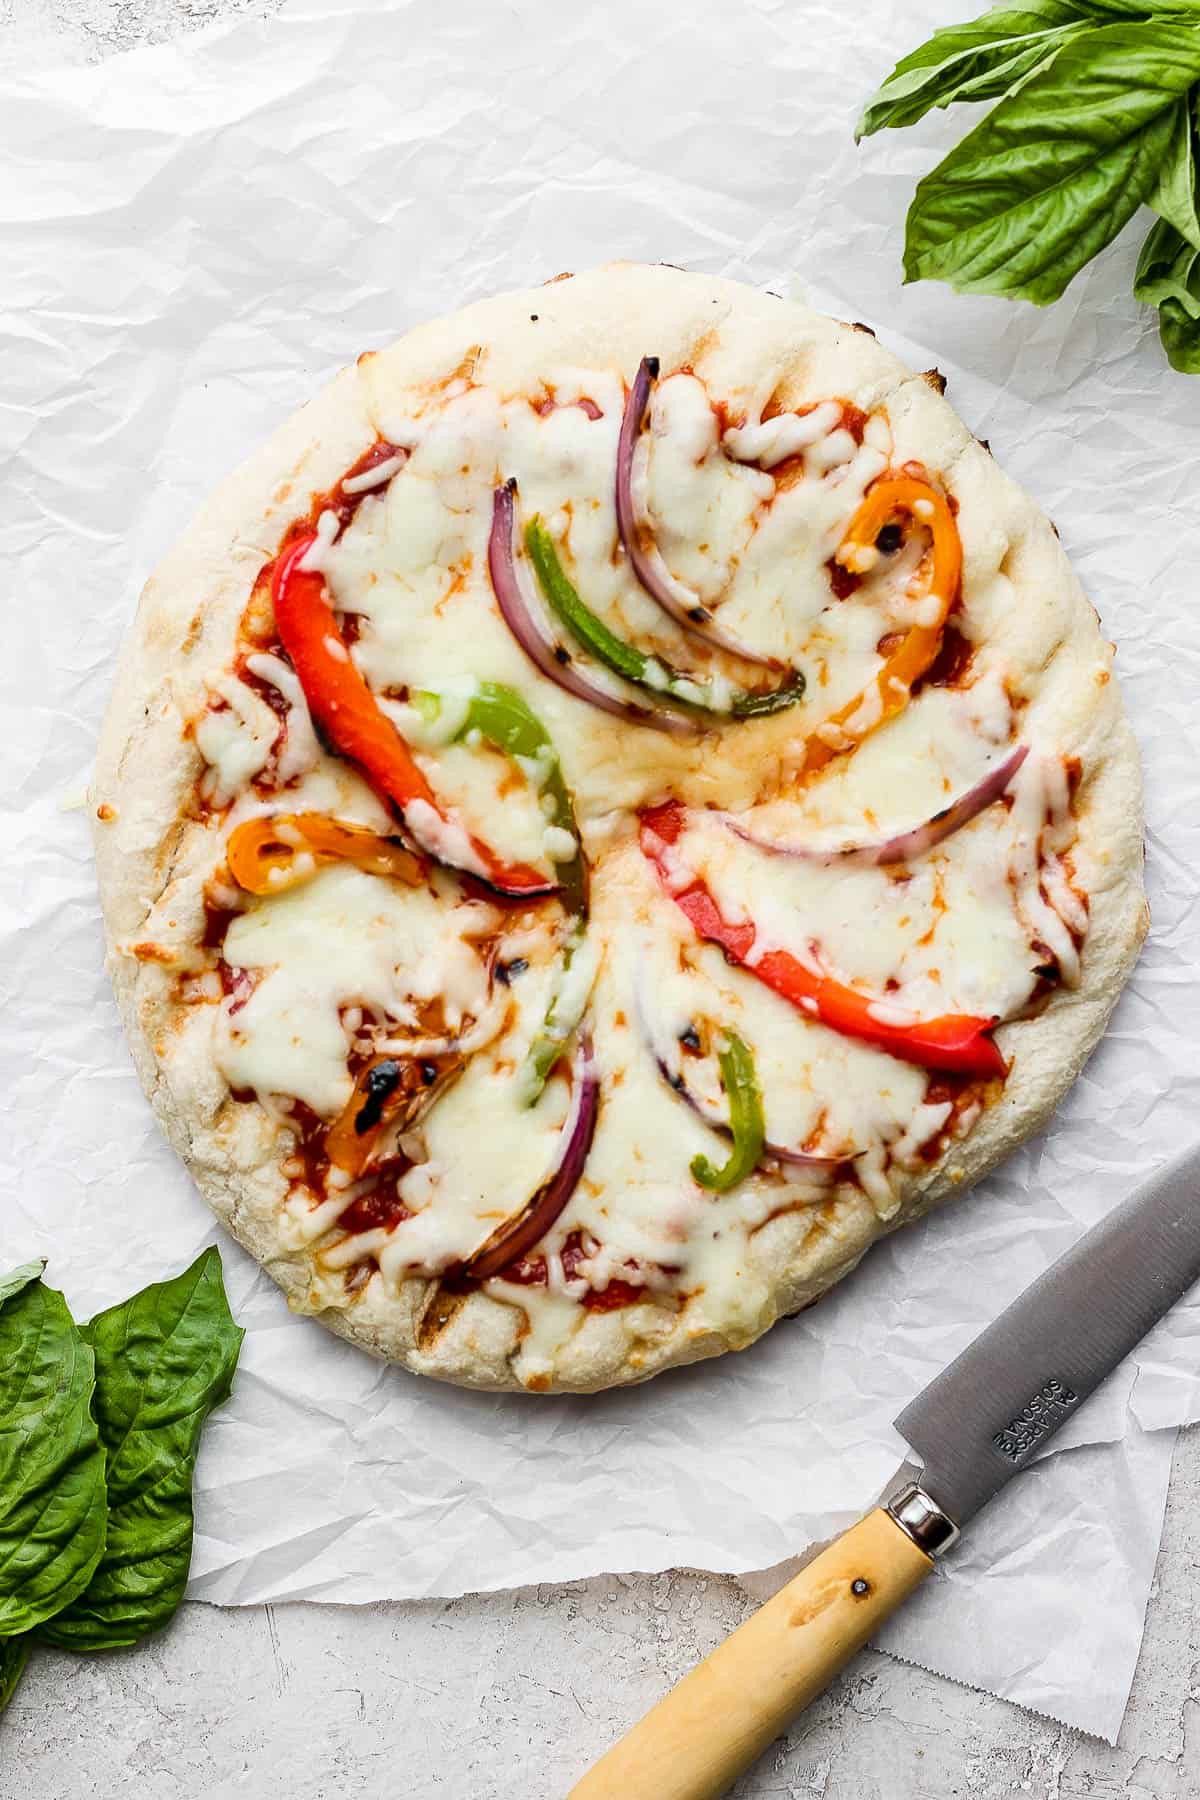 A fully cooked, grilled veggie pizza.